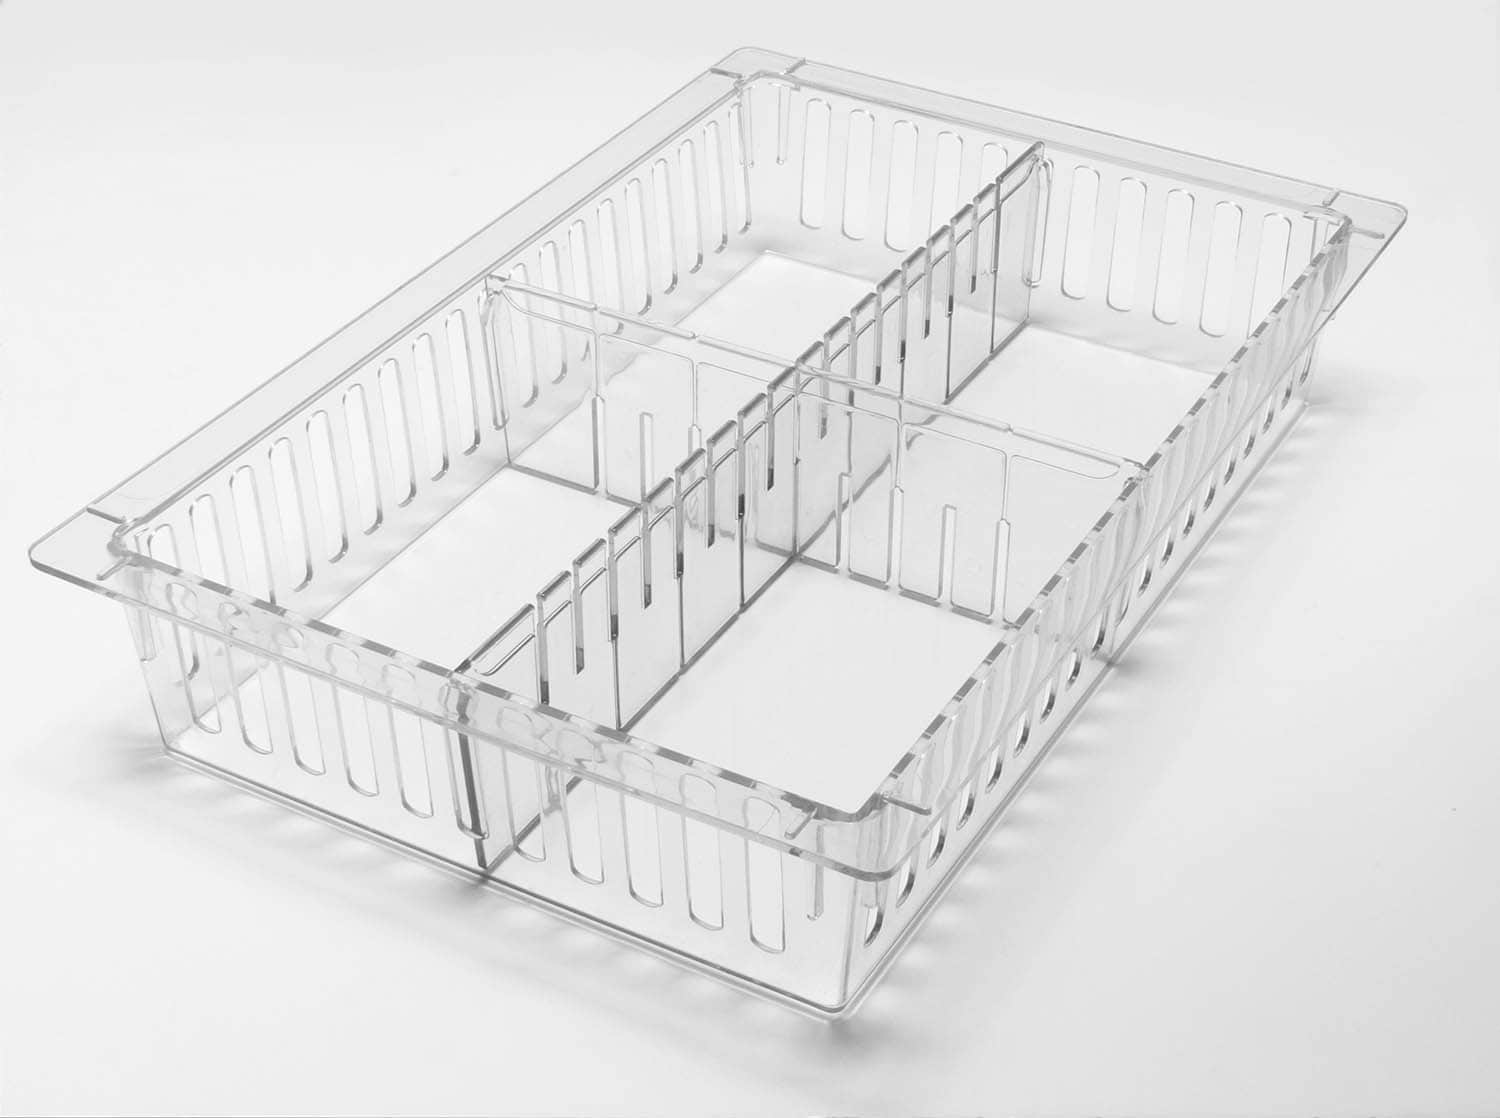 HTM71 100mm tray with dividers